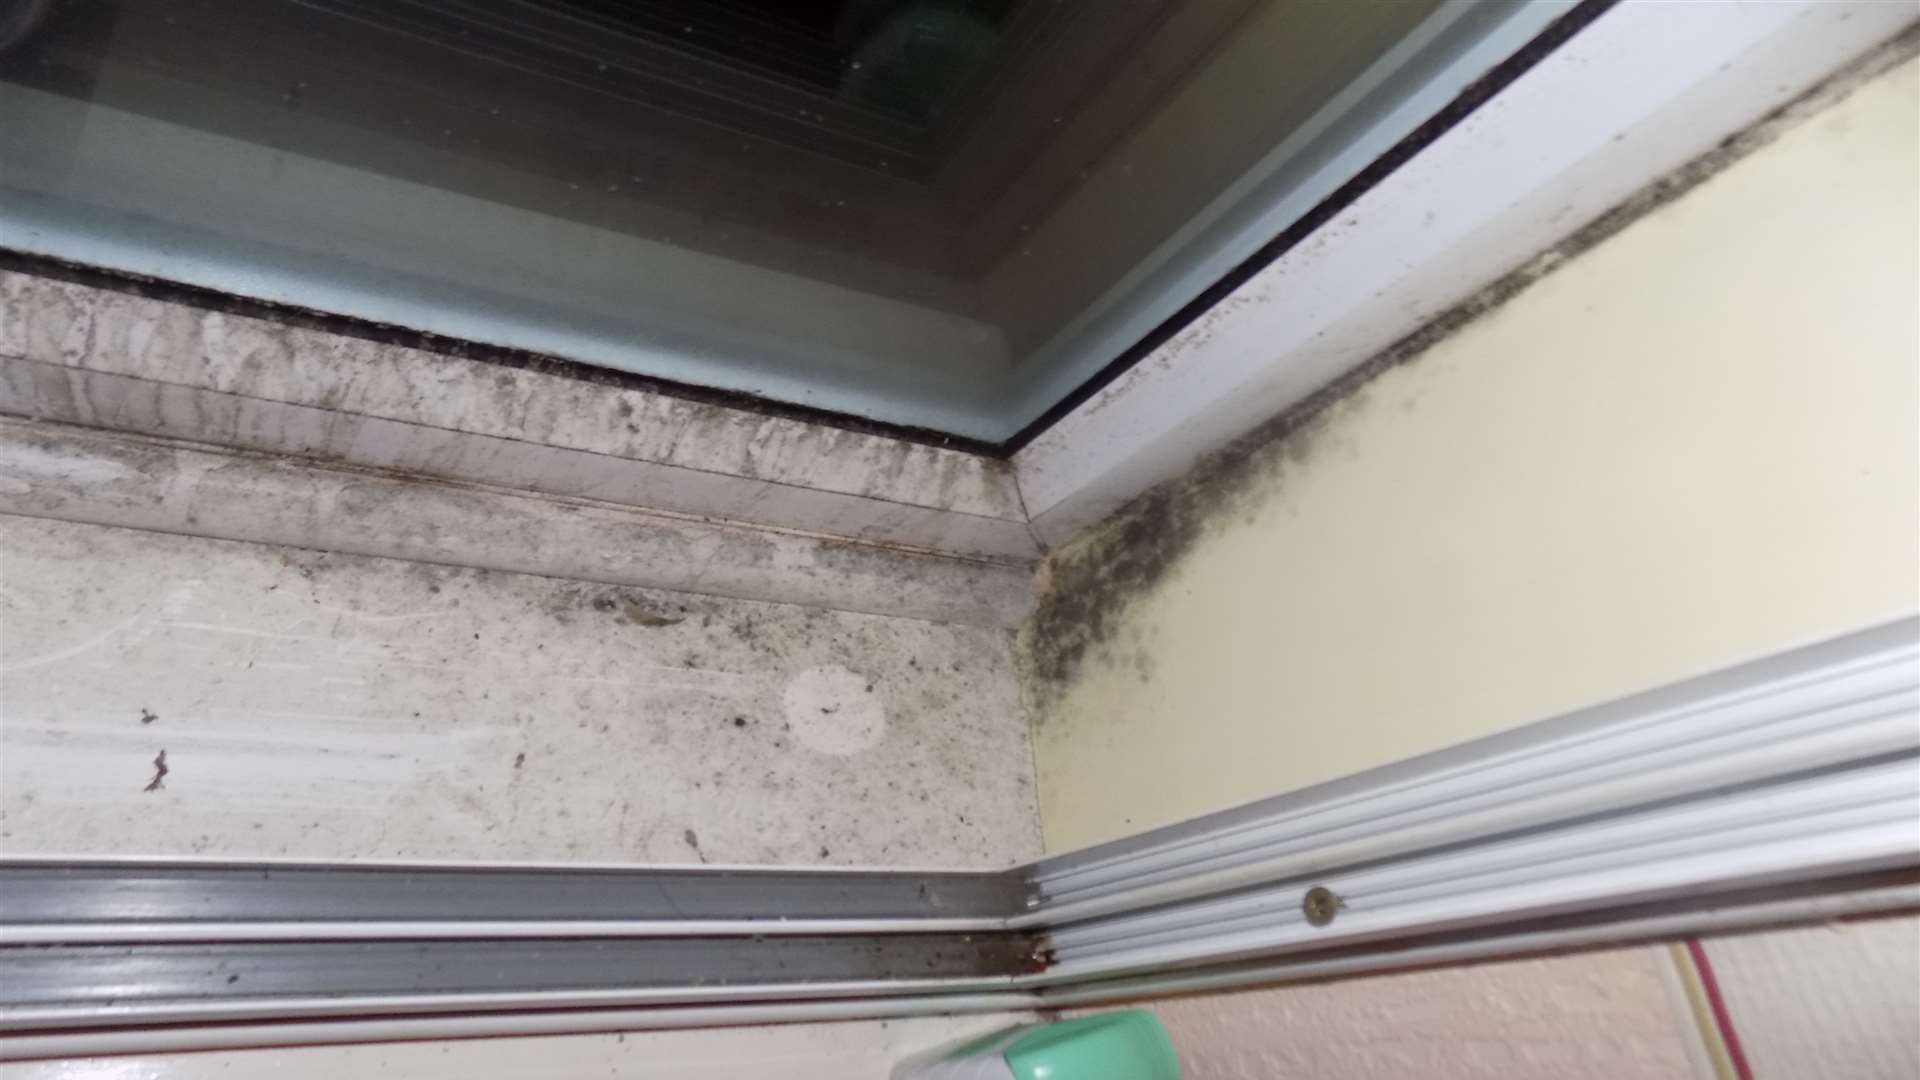 Mould has started to grow in the couples' windowframe